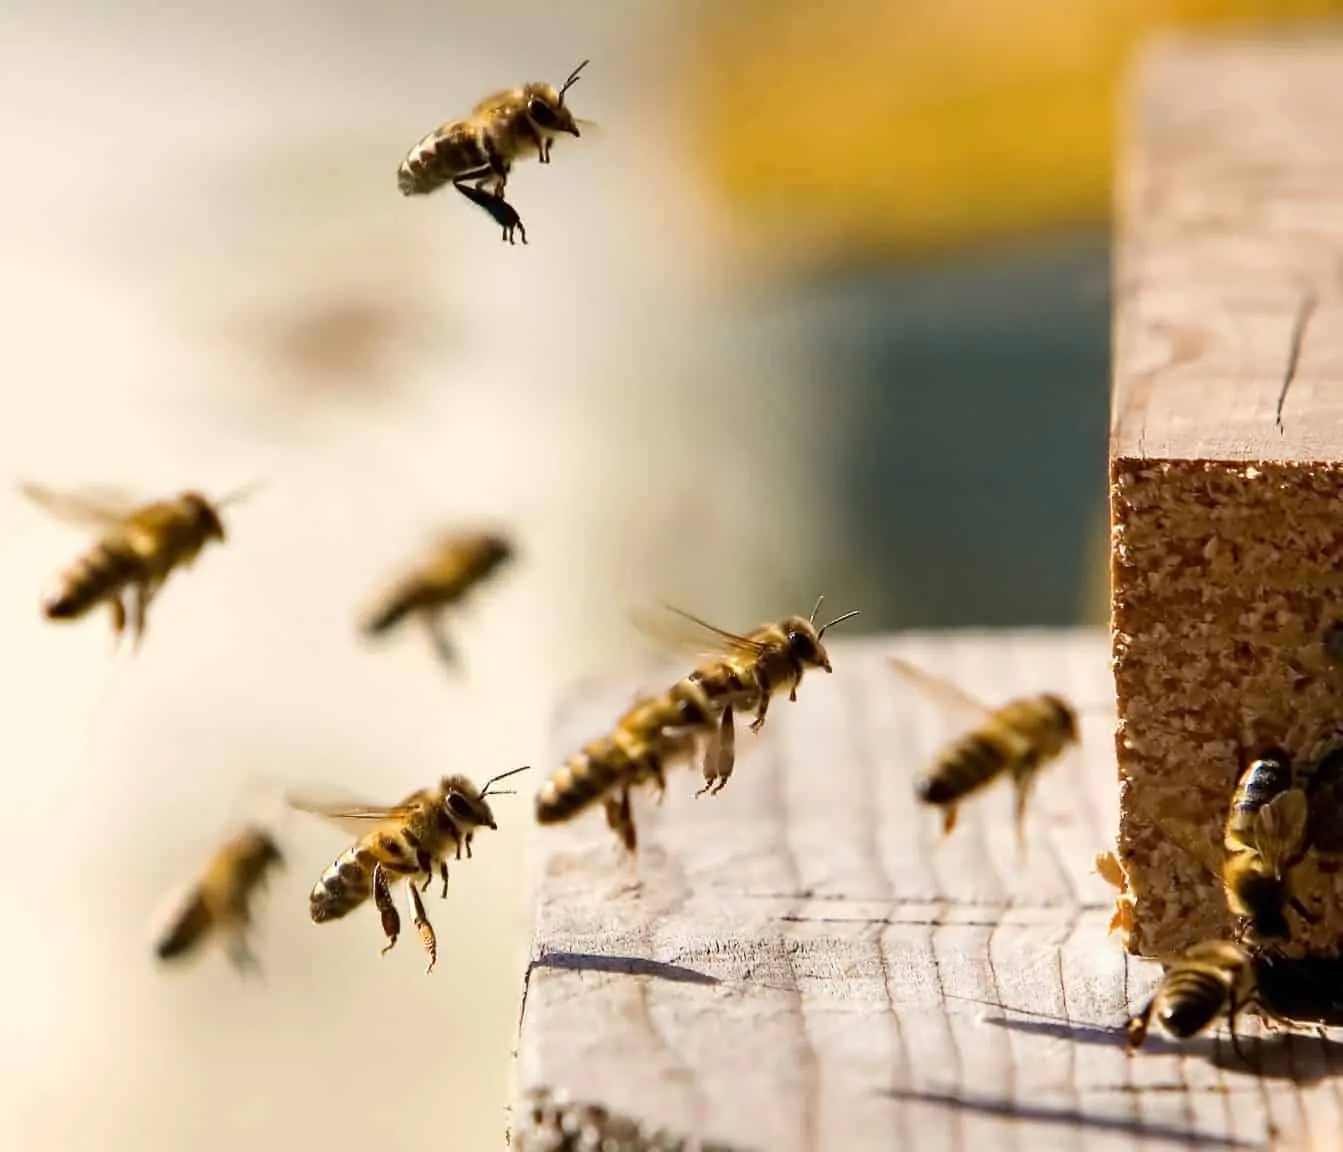 Bee using its sophisticated navigation system to find its way back to the hive